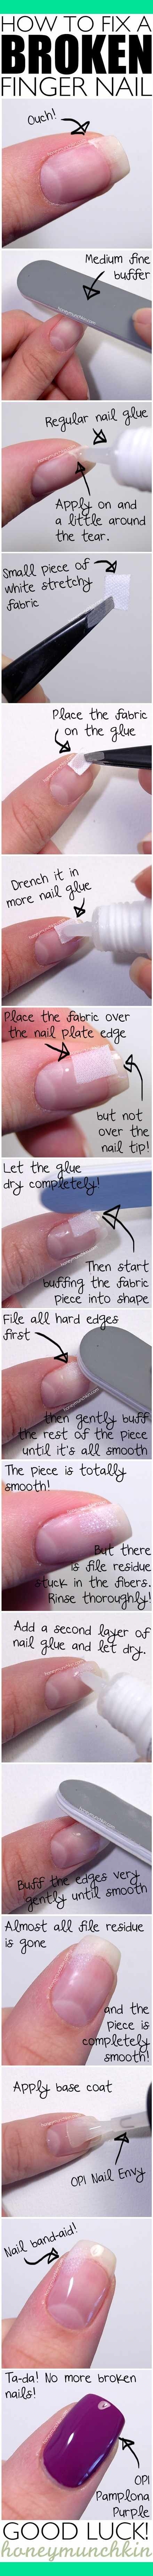 manicure tip guides, tips for manicure, tips manicure, diy manicure, easy manicure tips and tricks, how to do manicure, how to do the perfect manicure at home, how to do the perfect manicure, how to give yourself the perfect manicure